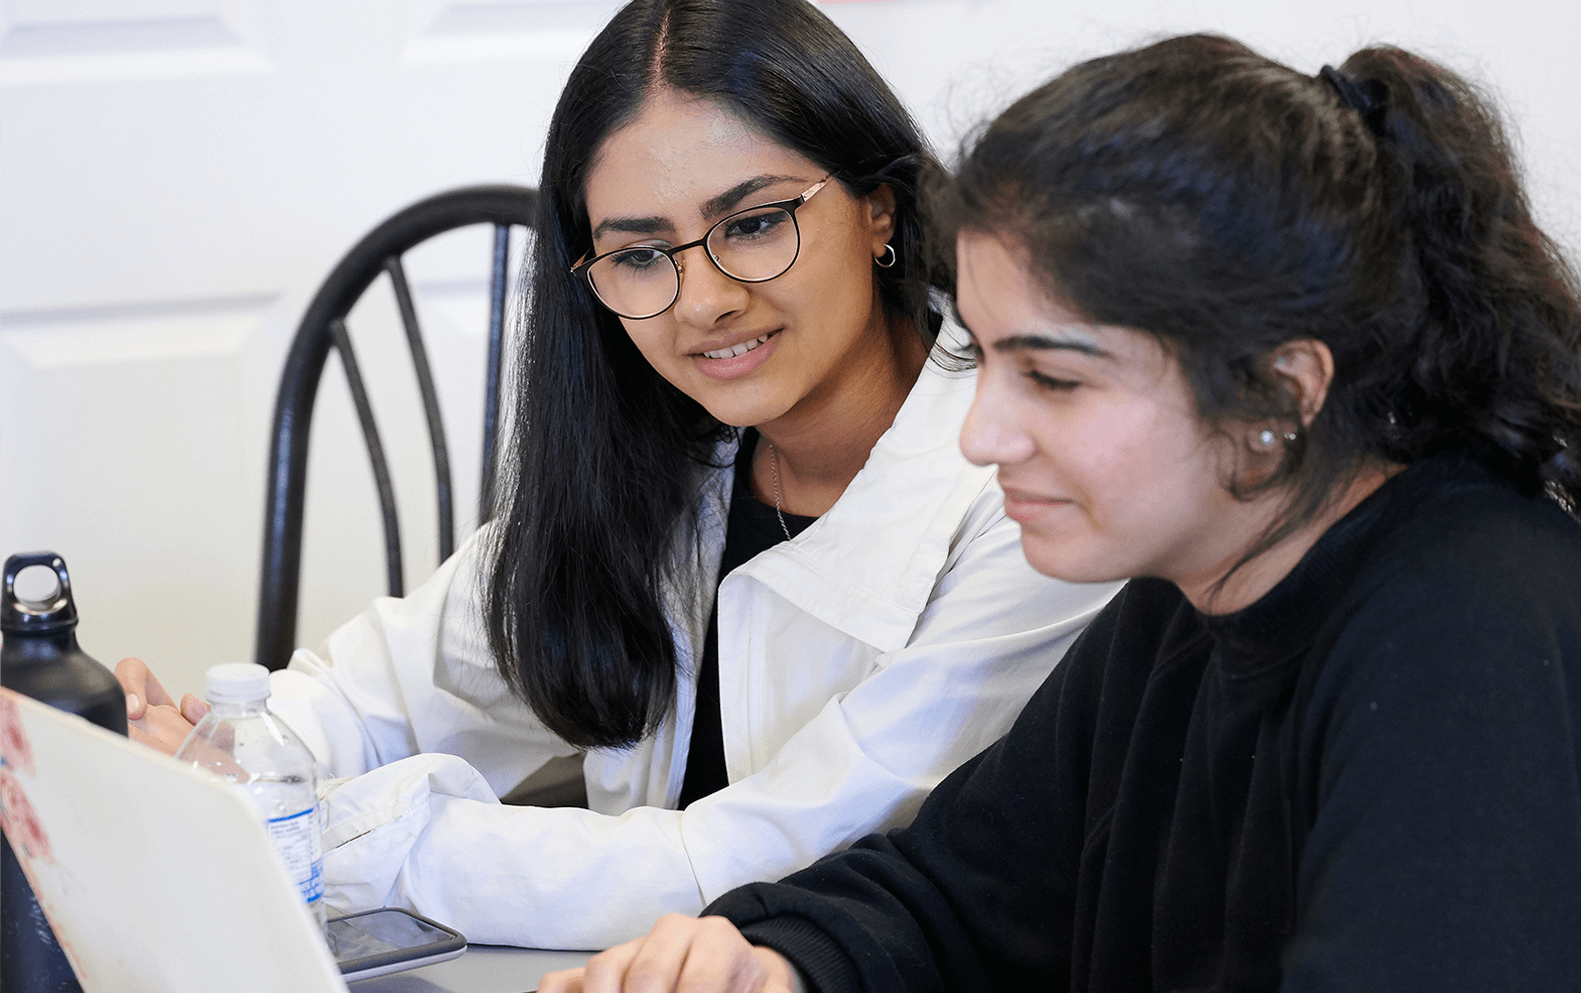 Build your local computer science community and your resume. Apply for Canada Learning Code’s teen ambassador program today.